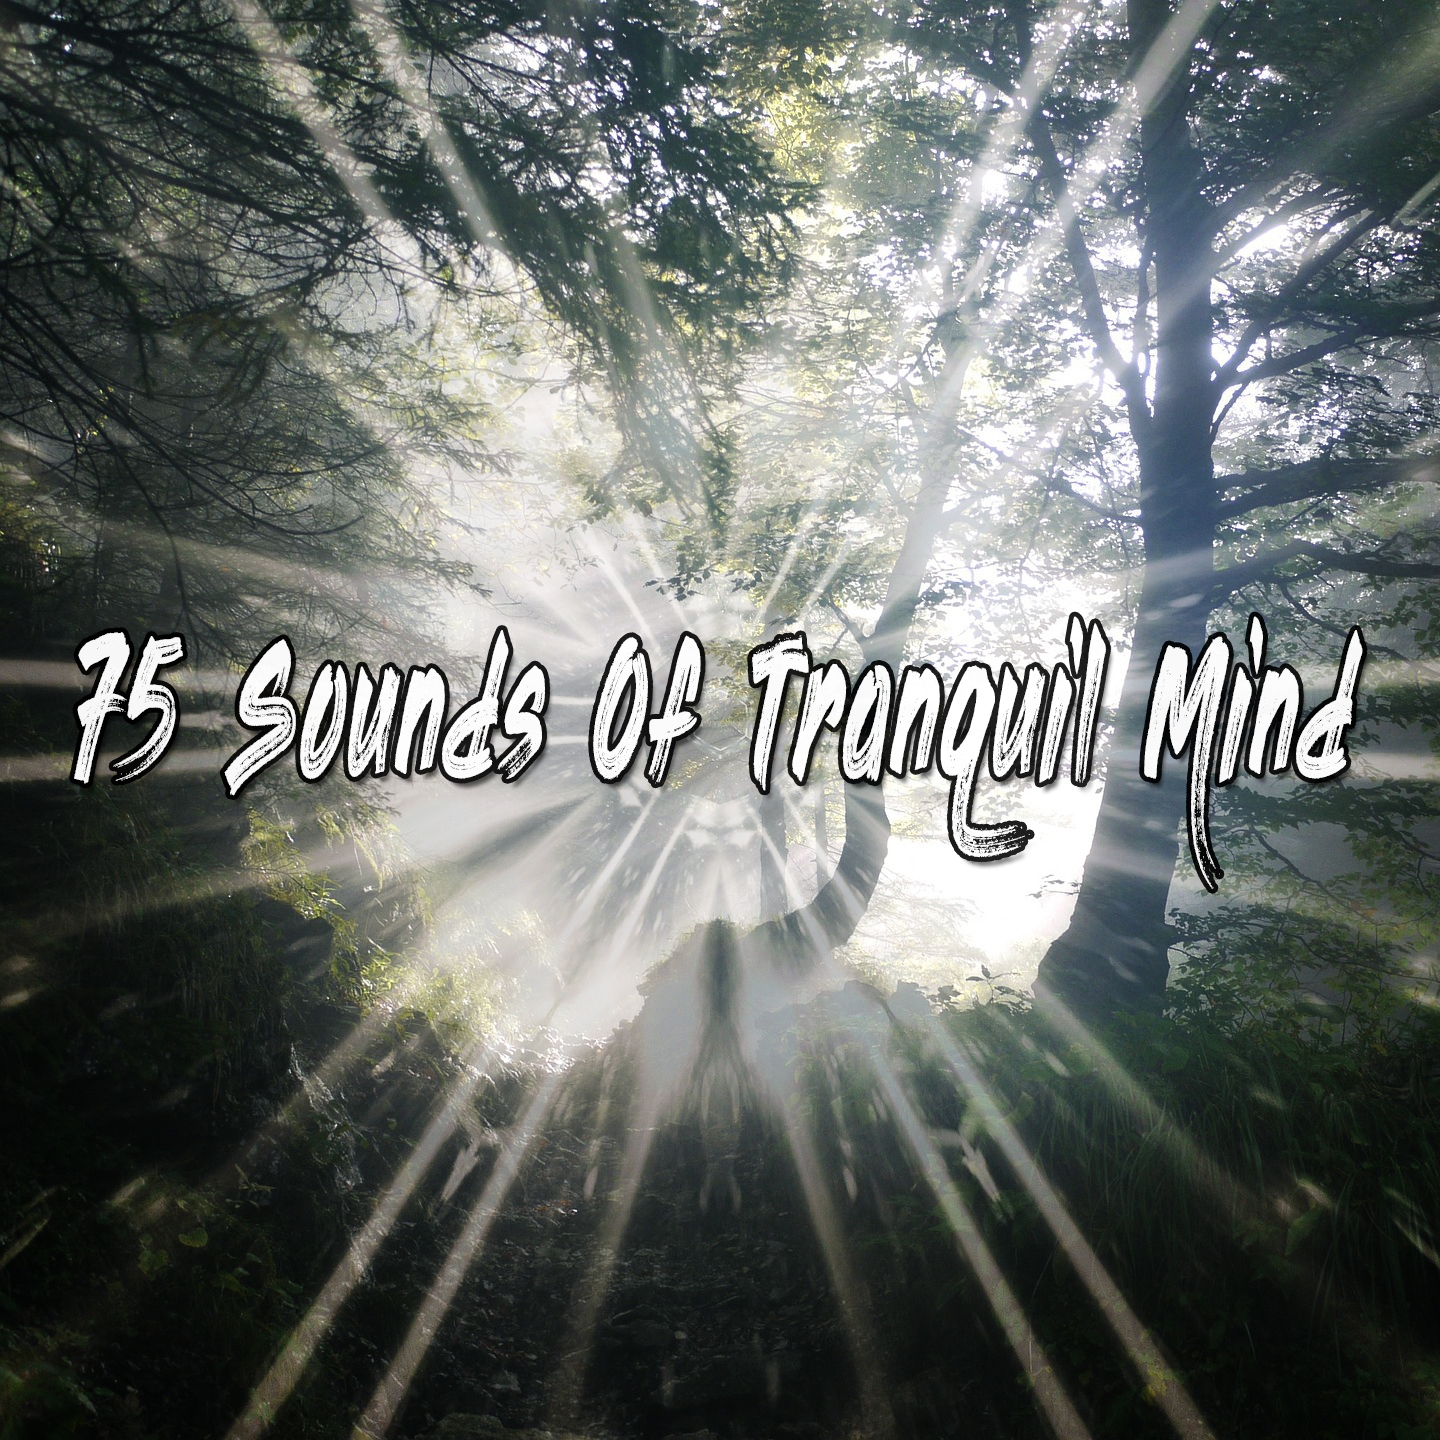 75 Sounds Of Tranquil Mind